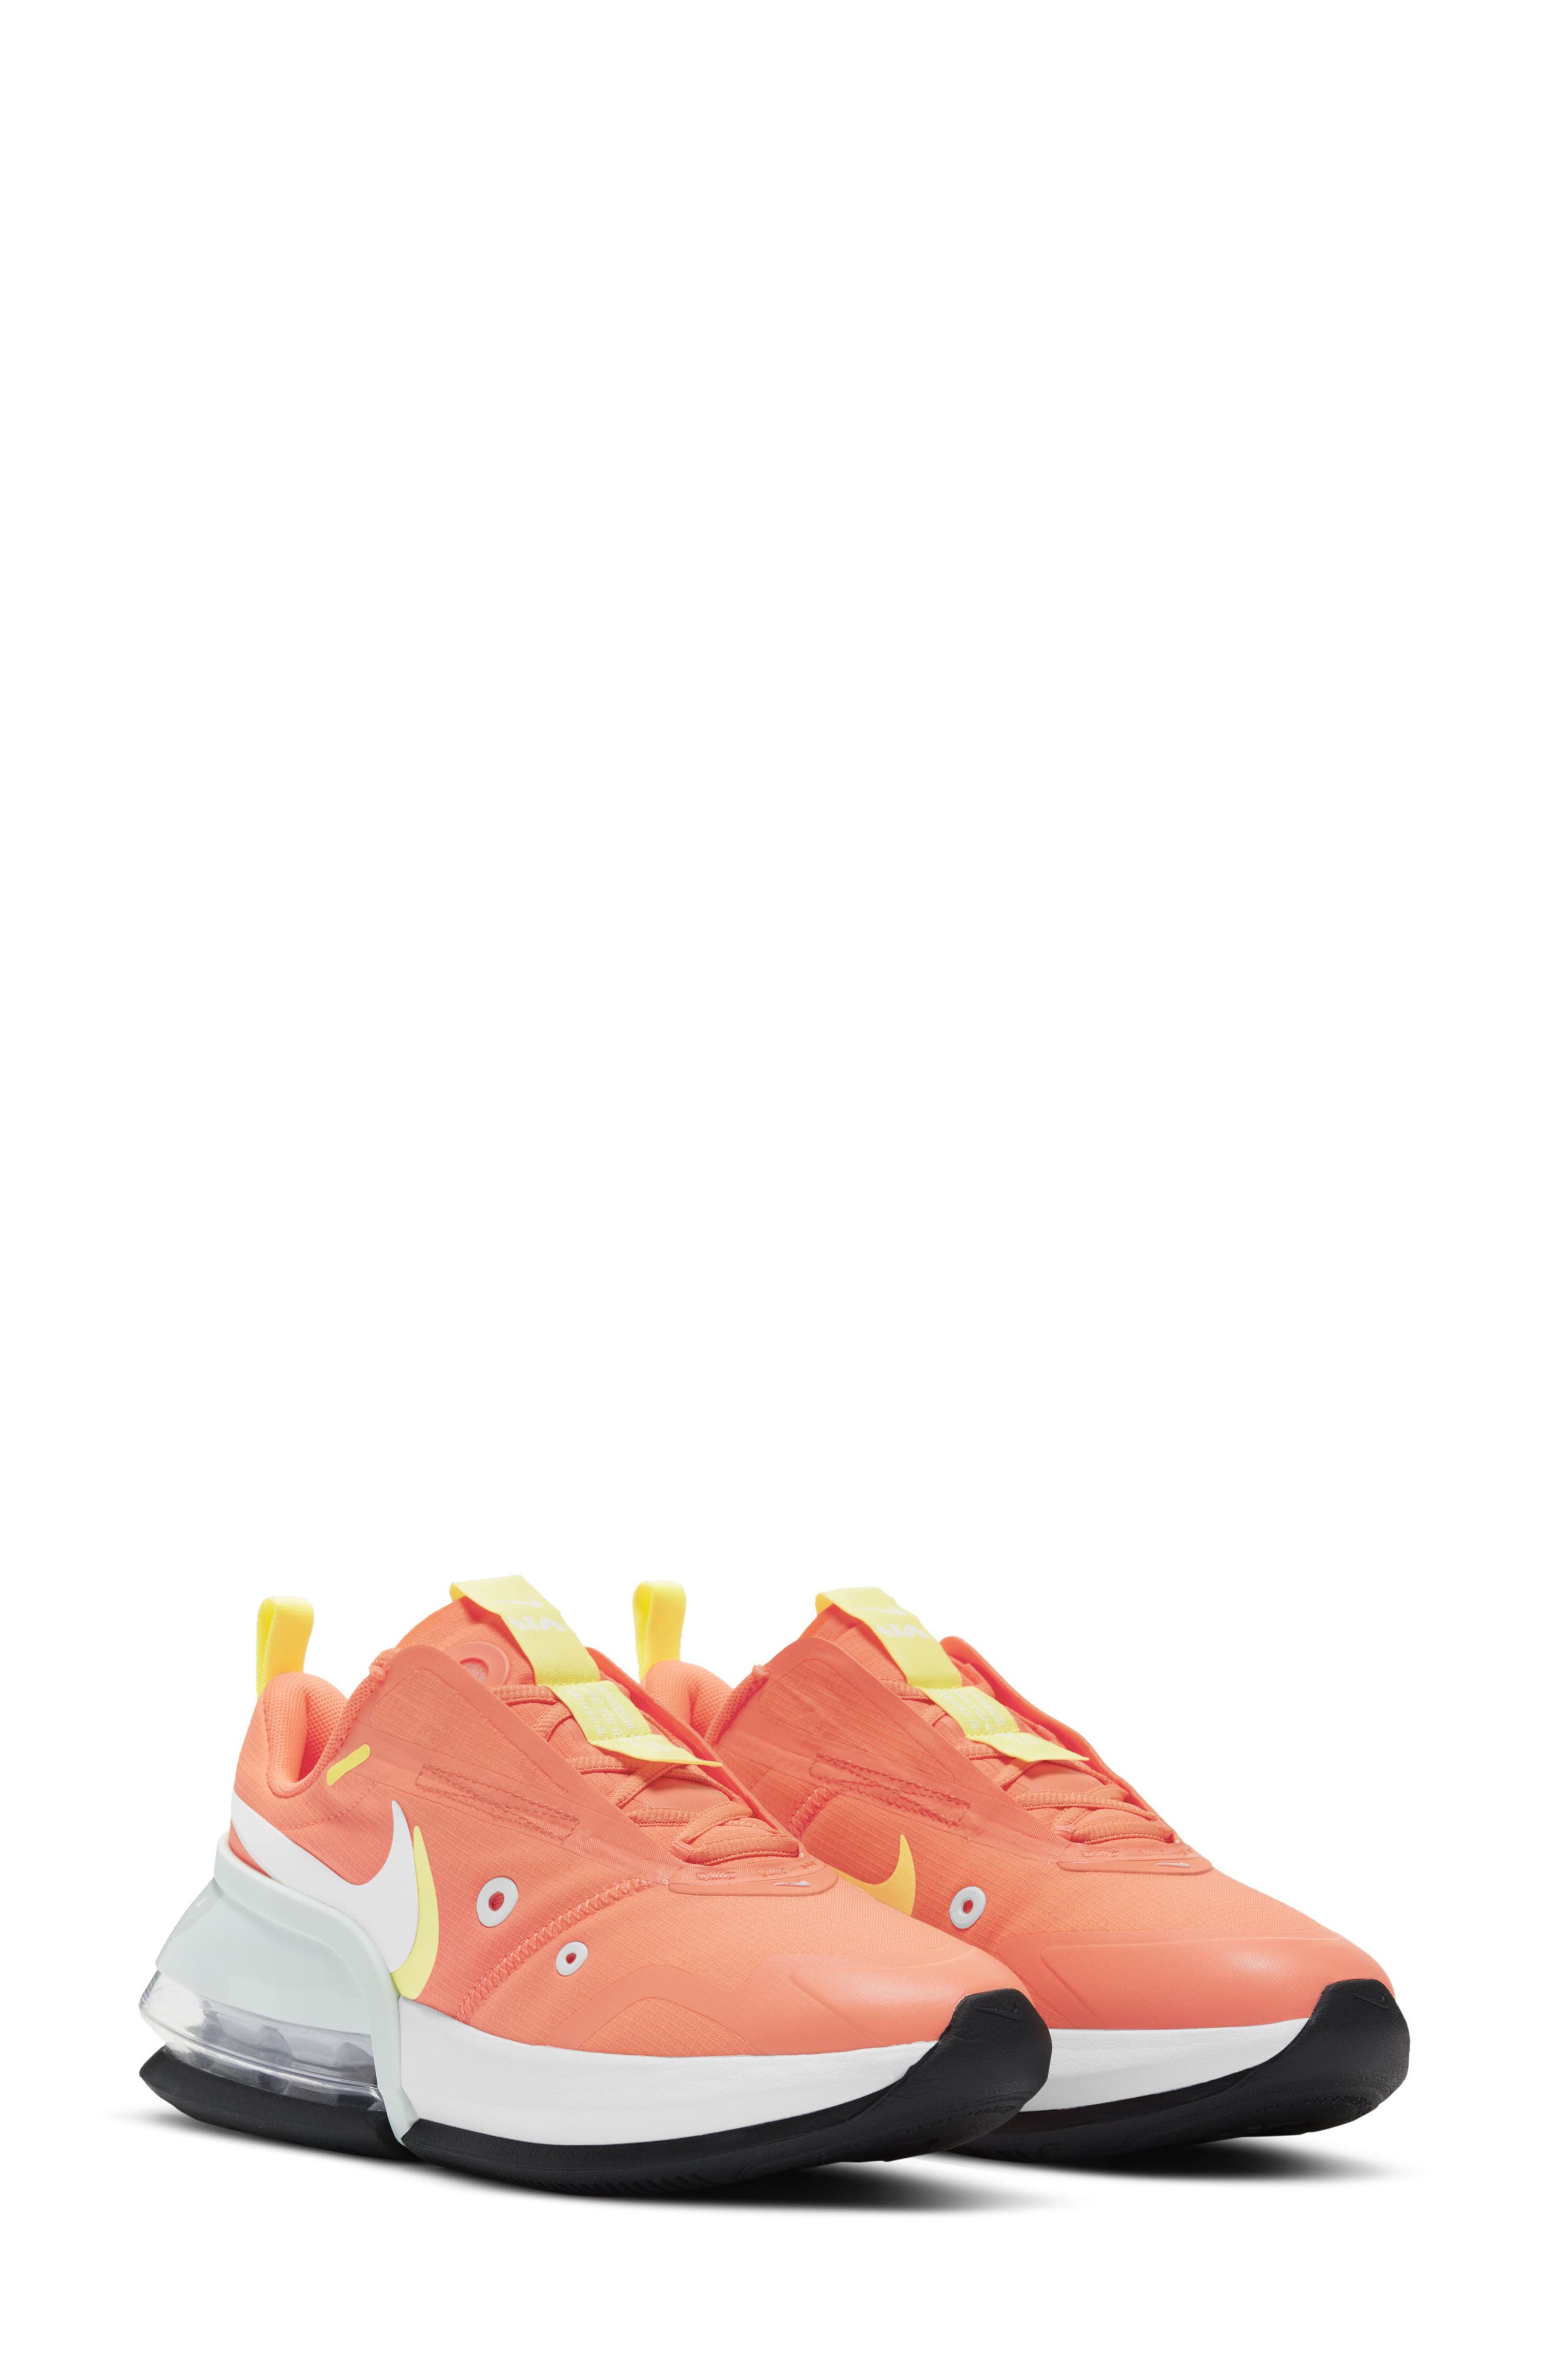 orange and gray sneakers